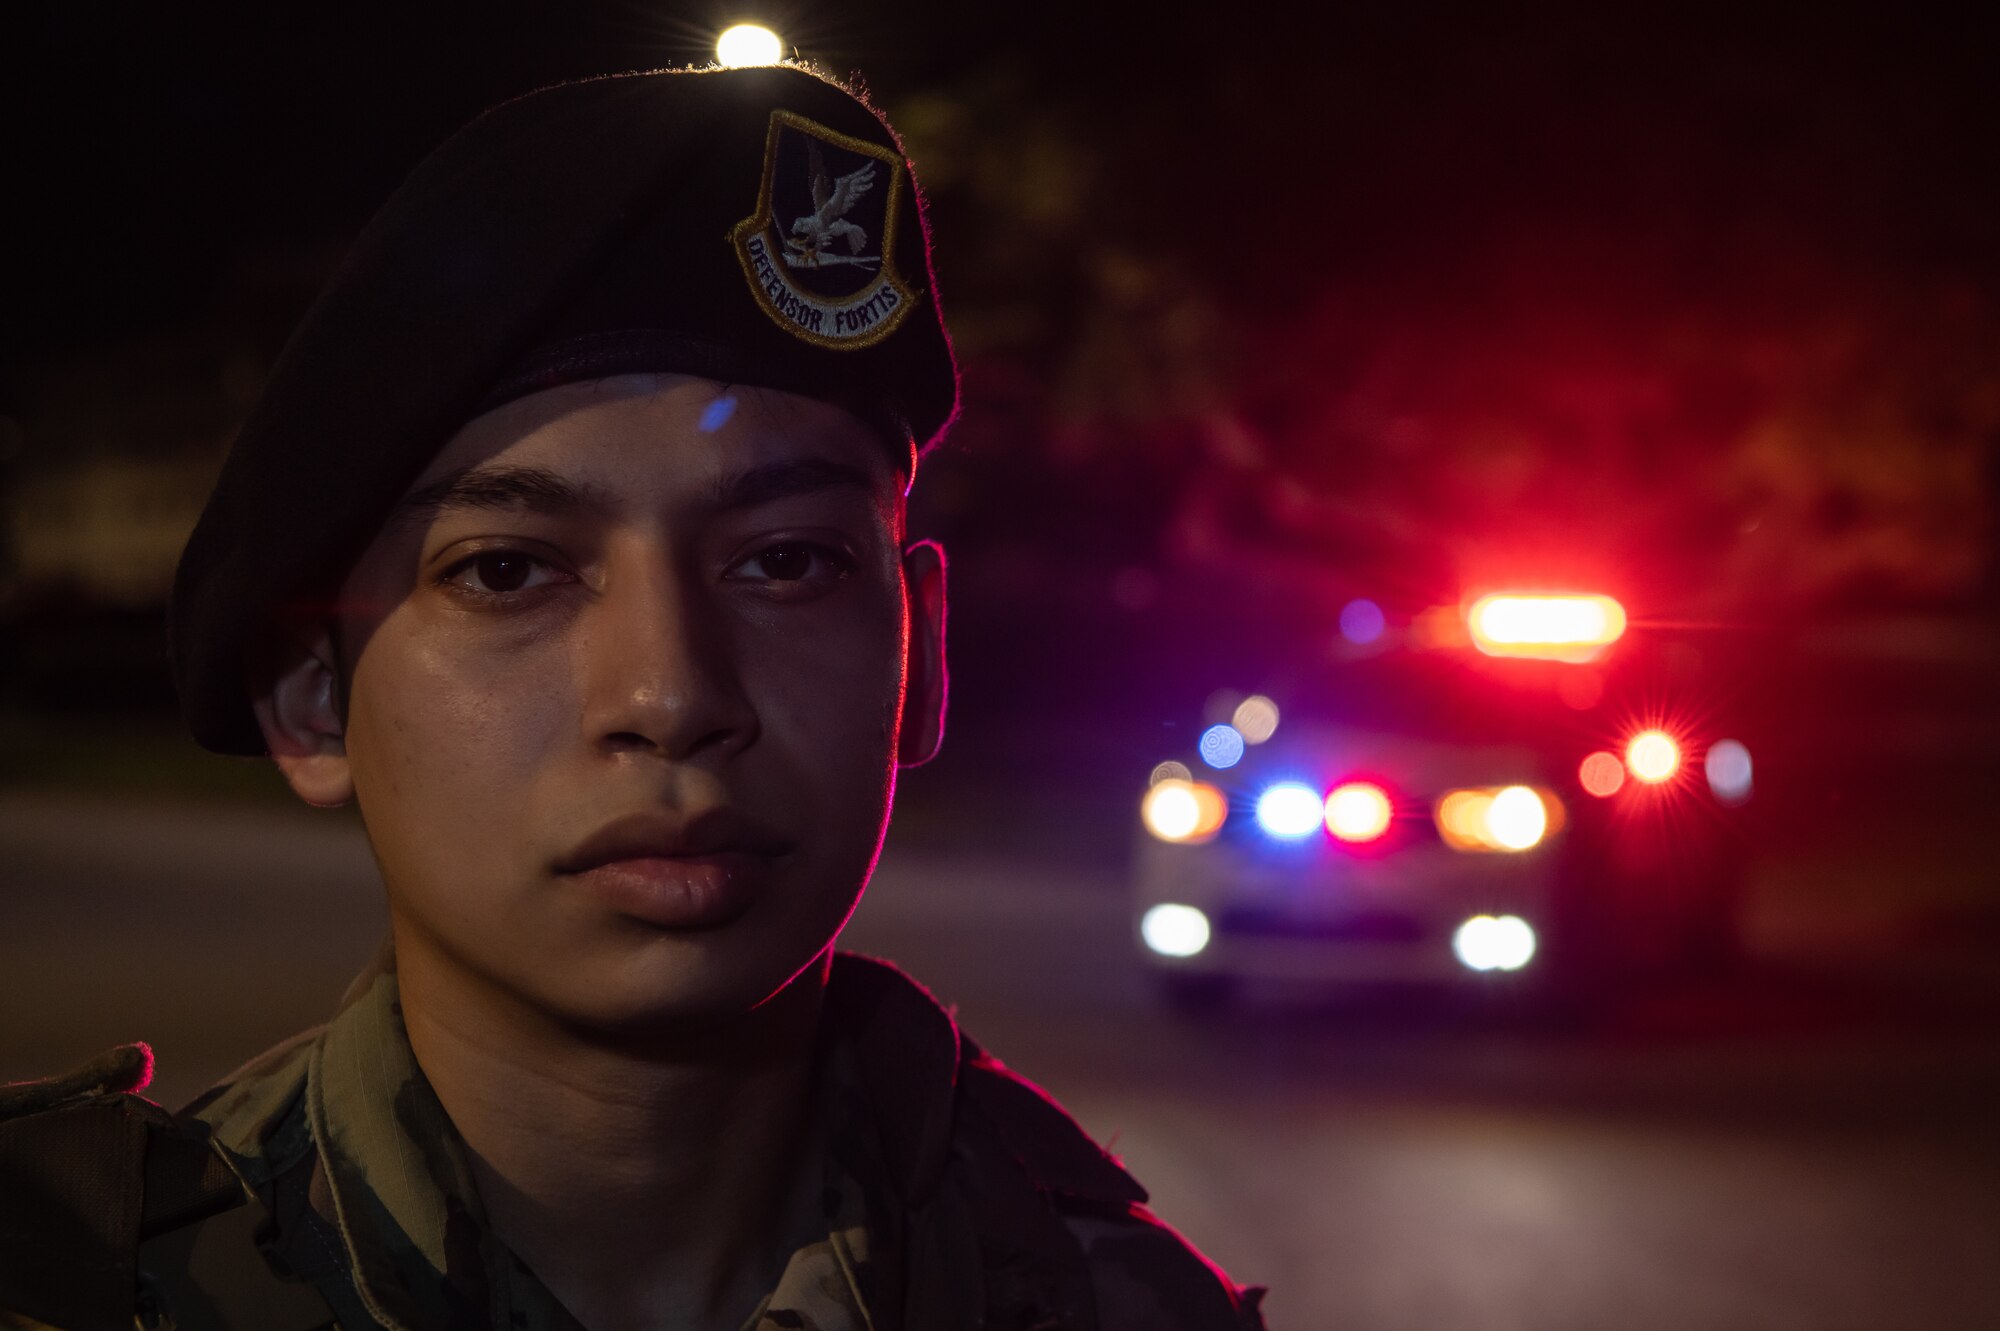 An Airman standing in front of a police car with the lights on.